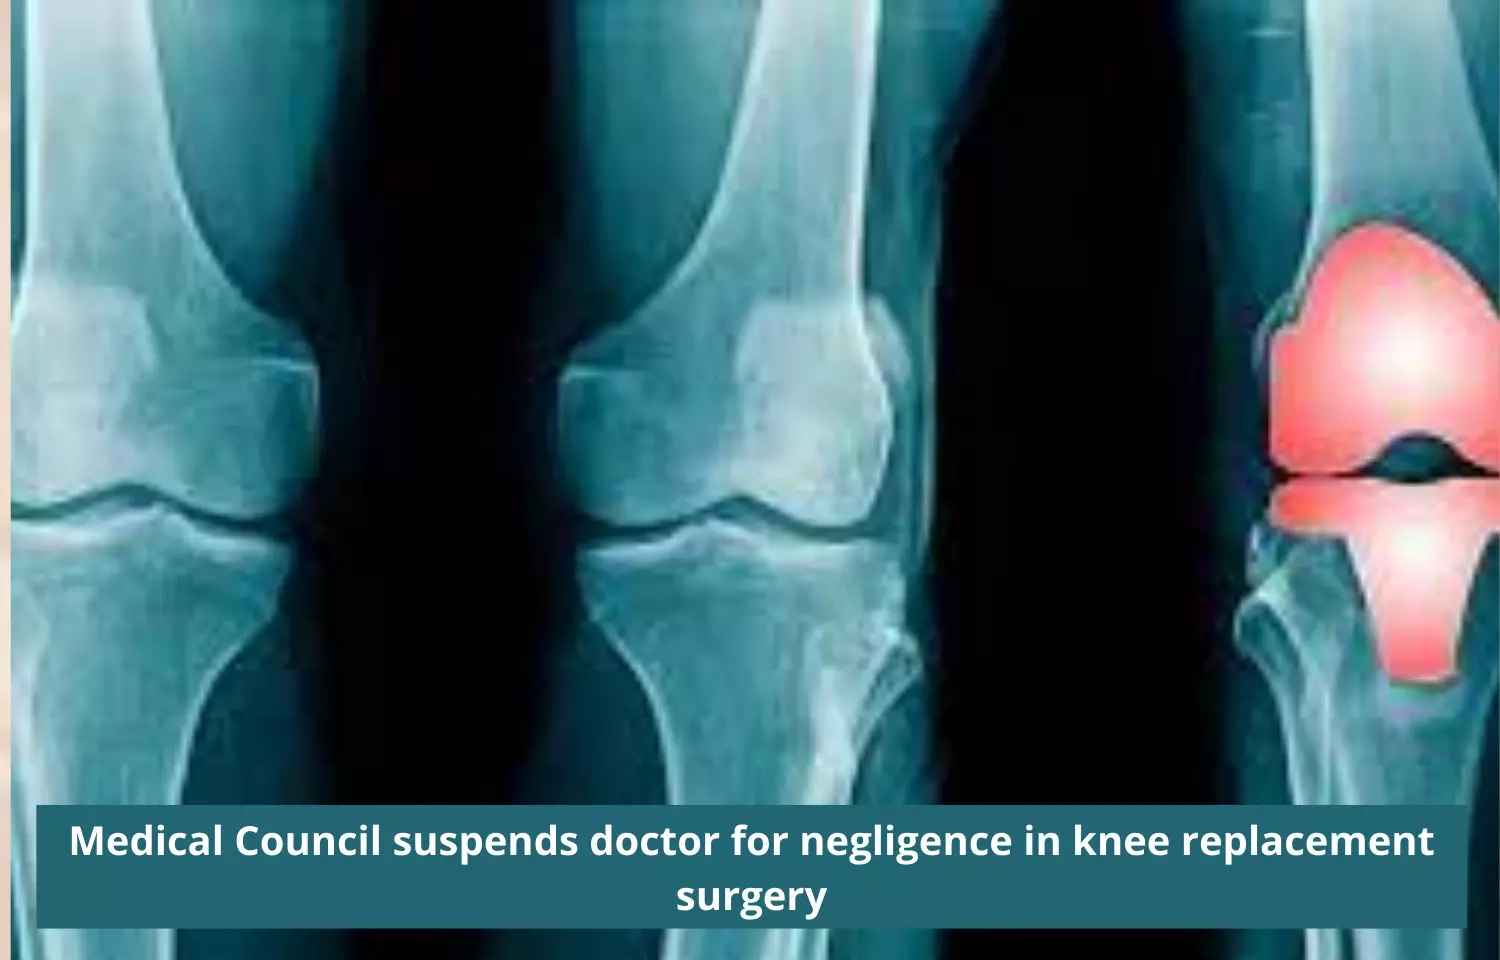 Negligence in knee replacement surgery: Medical Council suspends doctor for 6 months